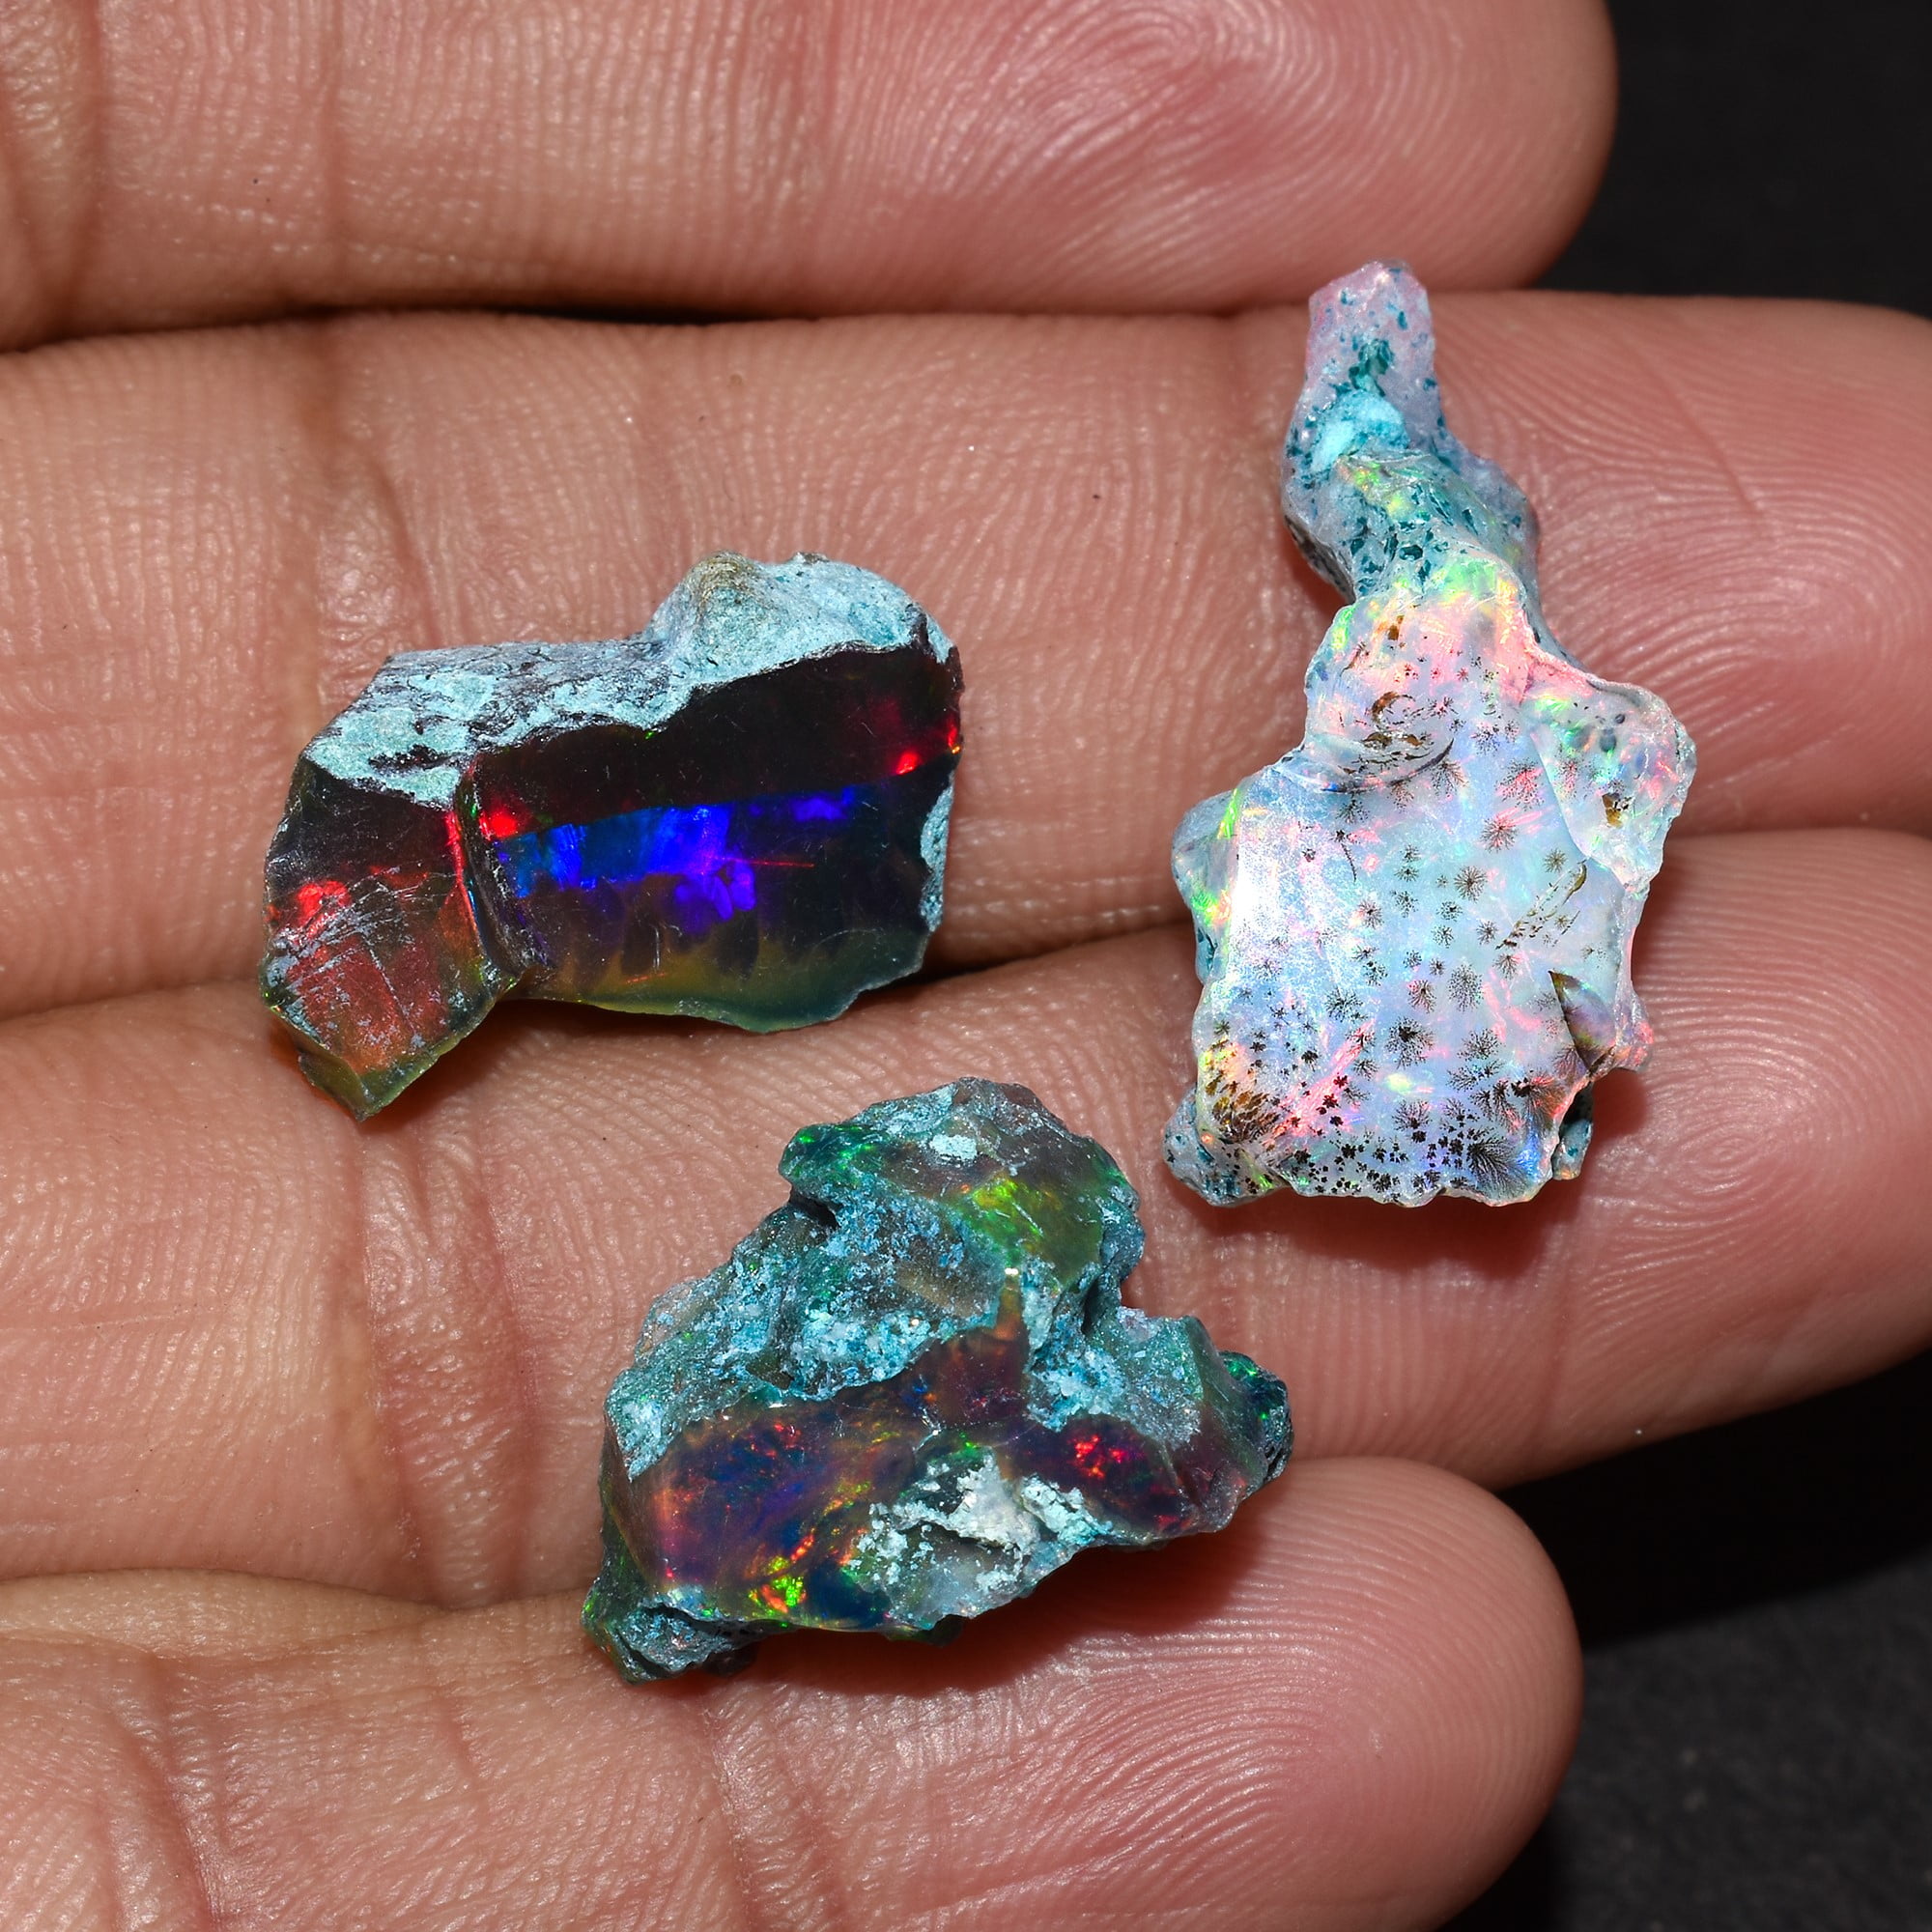 Crystalshop Raw Opal Crystals - 25cts Genuine Natural AAA Grade Opal Gram Lot, Reiki Crystals and Healing Stones,Jewelry Making Gemstone, Ultra Fire